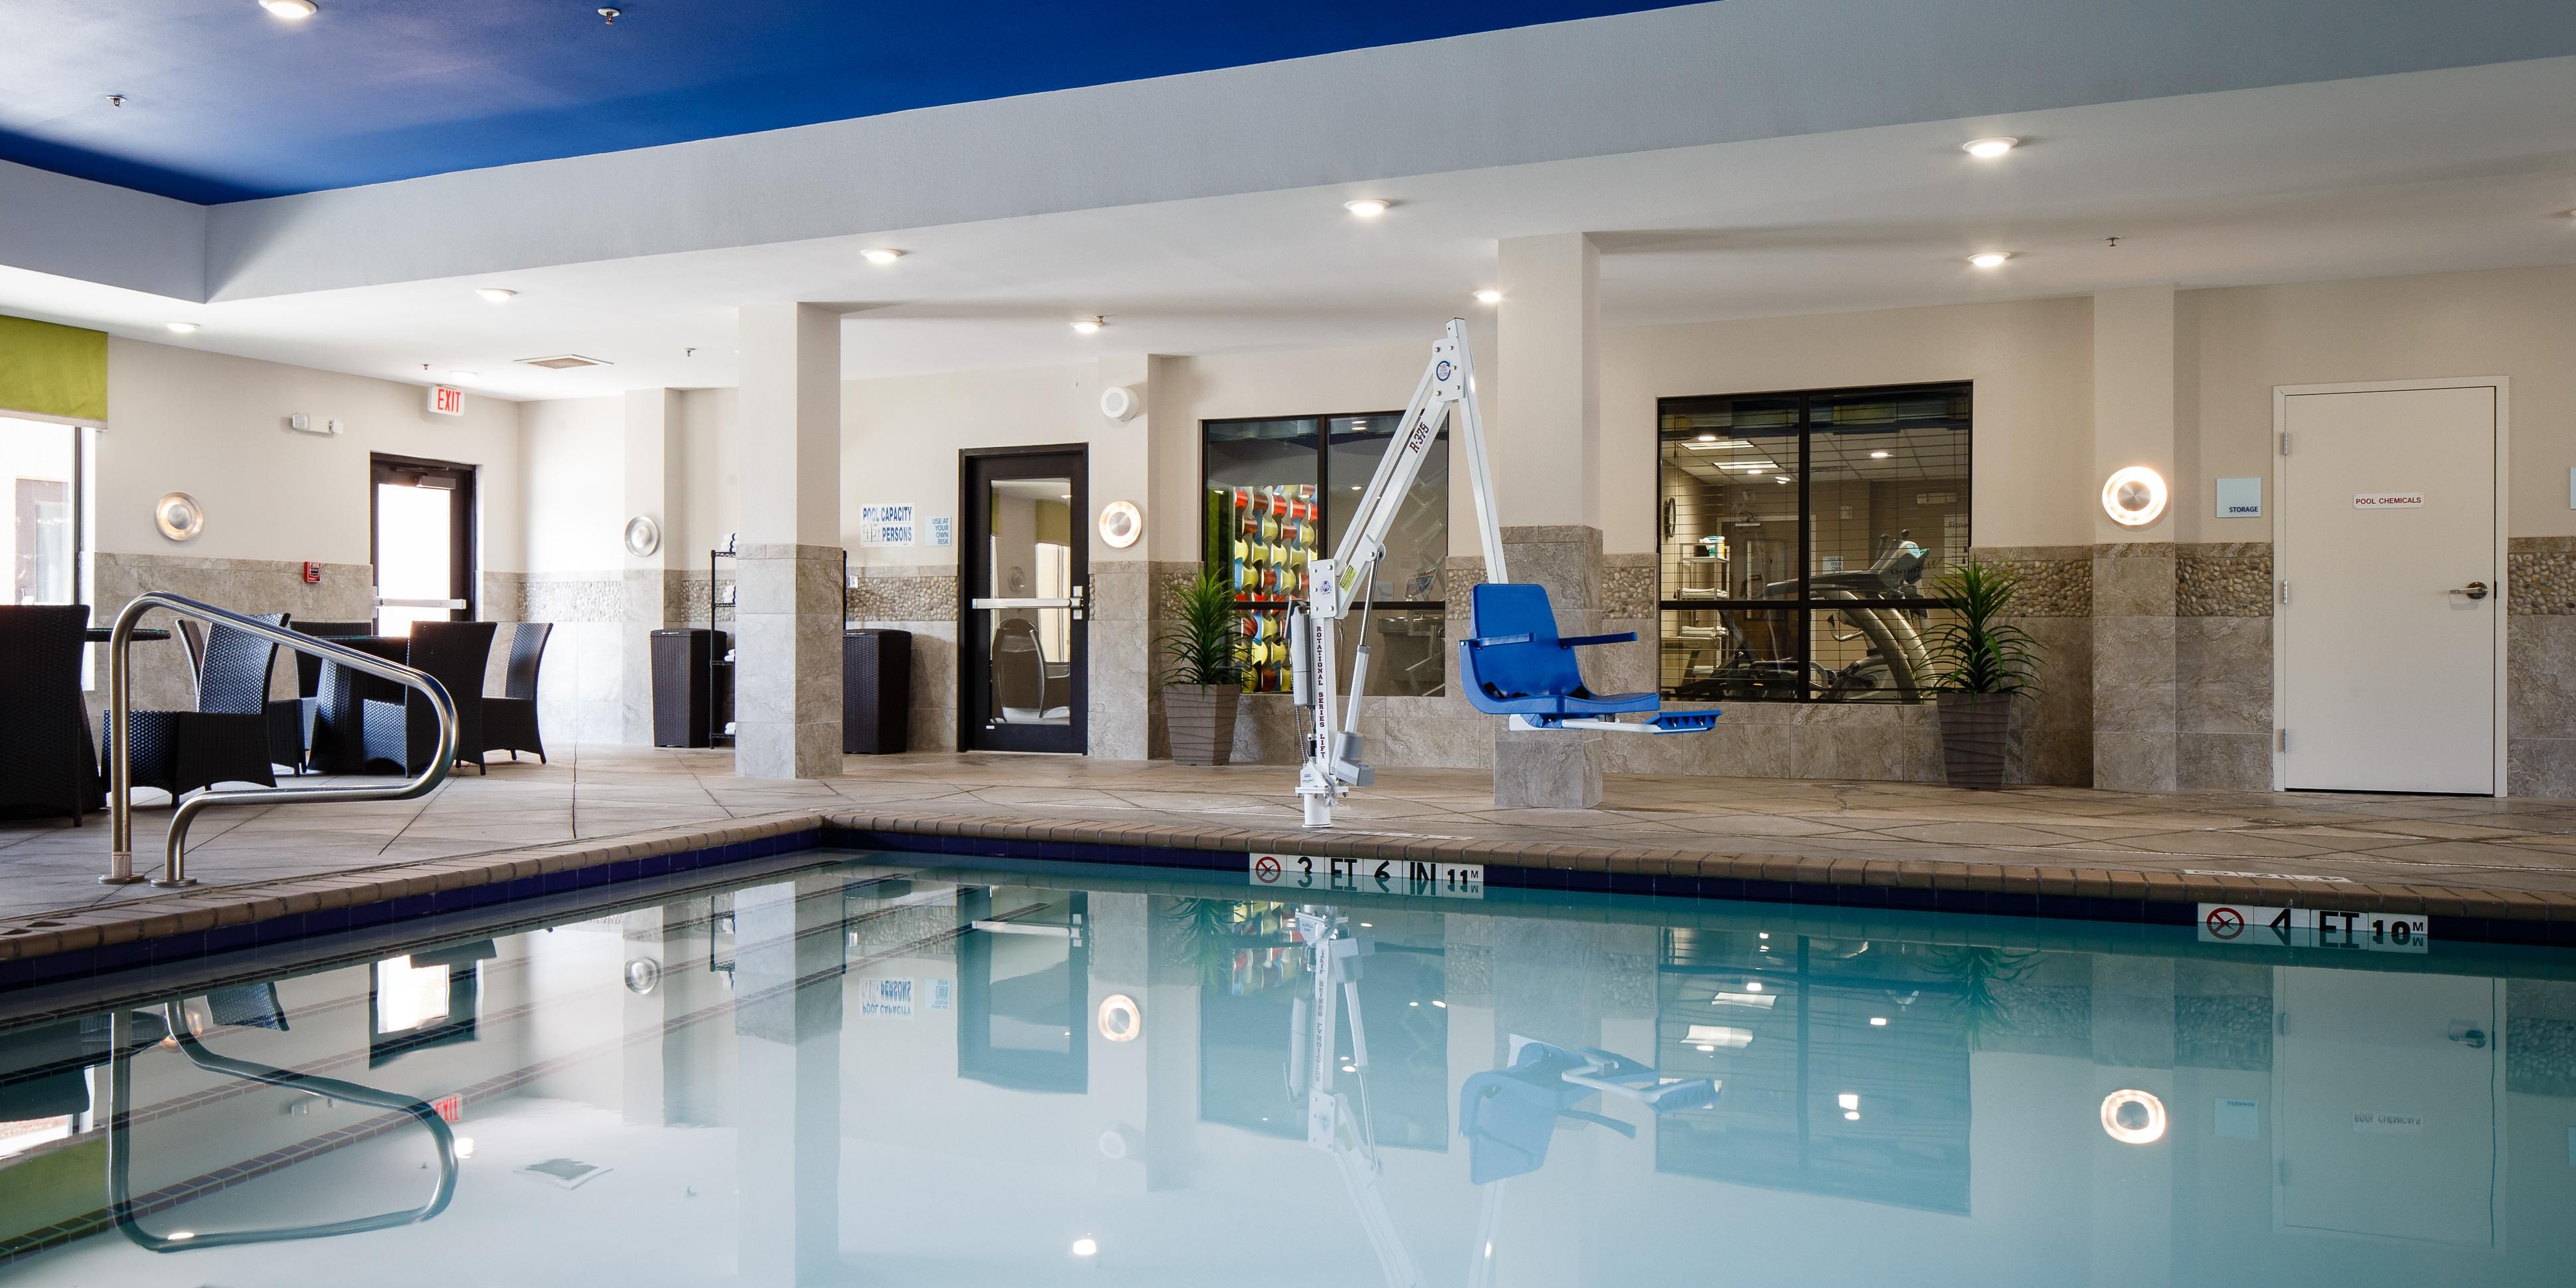 Doesn't matter if it's 115 degrees or 5 below 0, we've got you covered! Hop into our indoor pool year around to exercise, have fun with the family or just relax.
